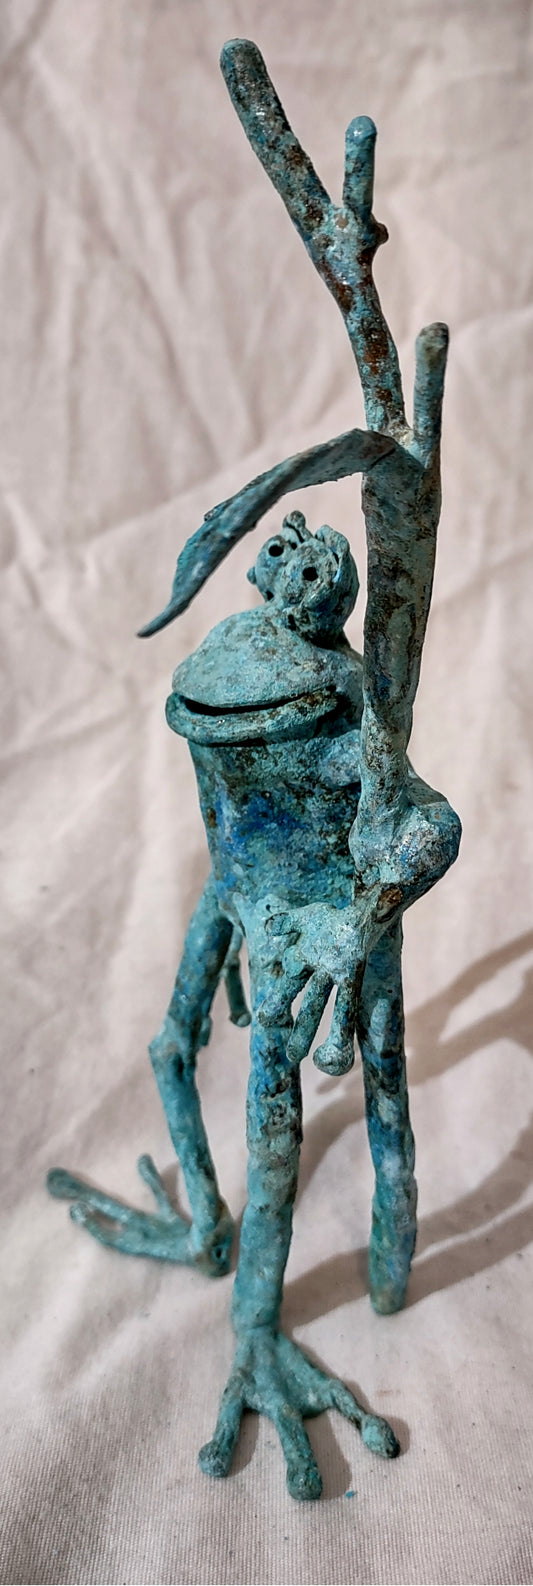 Copper froglette figurine. Standing, holding onto a branch.